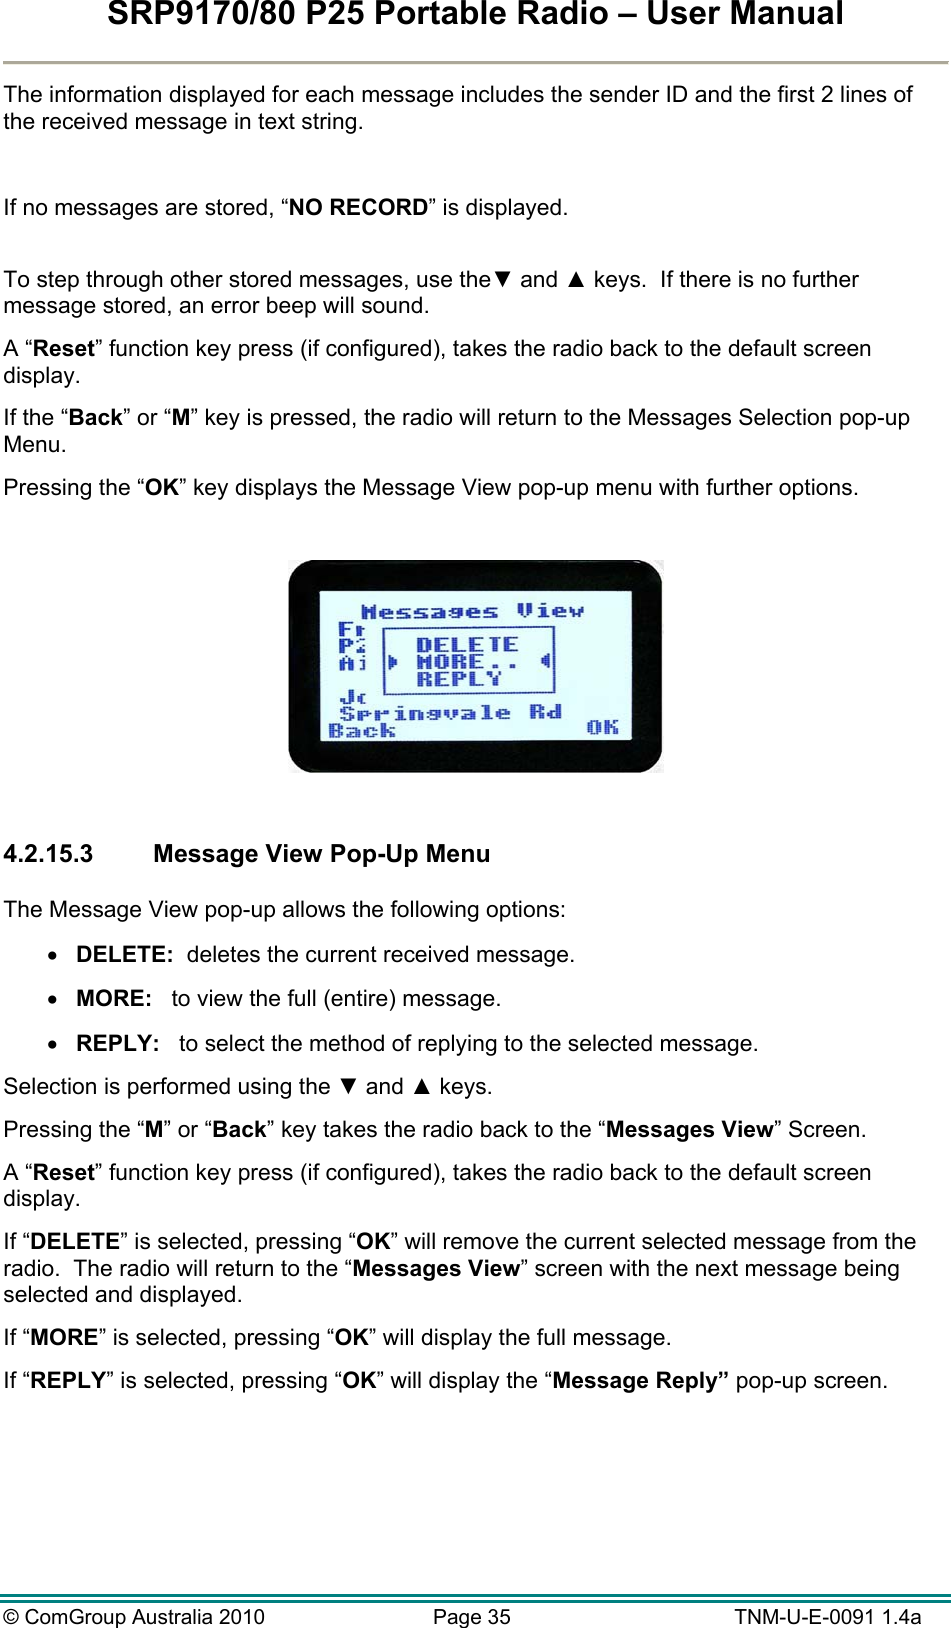 SRP9170/80 P25 Portable Radio – User Manual  © ComGroup Australia 2010  Page 35   TNM-U-E-0091 1.4a The information displayed for each message includes the sender ID and the first 2 lines of the received message in text string.  If no messages are stored, “NO RECORD” is displayed.  To step through other stored messages, use the▼ and ▲ keys.  If there is no further message stored, an error beep will sound. A “Reset” function key press (if configured), takes the radio back to the default screen display. If the “Back” or “M” key is pressed, the radio will return to the Messages Selection pop-up Menu. Pressing the “OK” key displays the Message View pop-up menu with further options.    4.2.15.3  Message View Pop-Up Menu  The Message View pop-up allows the following options:  DELETE:  deletes the current received message.  MORE:   to view the full (entire) message.  REPLY:   to select the method of replying to the selected message. Selection is performed using the ▼ and ▲ keys. Pressing the “M” or “Back” key takes the radio back to the “Messages View” Screen. A “Reset” function key press (if configured), takes the radio back to the default screen display. If “DELETE” is selected, pressing “OK” will remove the current selected message from the radio.  The radio will return to the “Messages View” screen with the next message being selected and displayed. If “MORE” is selected, pressing “OK” will display the full message. If “REPLY” is selected, pressing “OK” will display the “Message Reply” pop-up screen. 